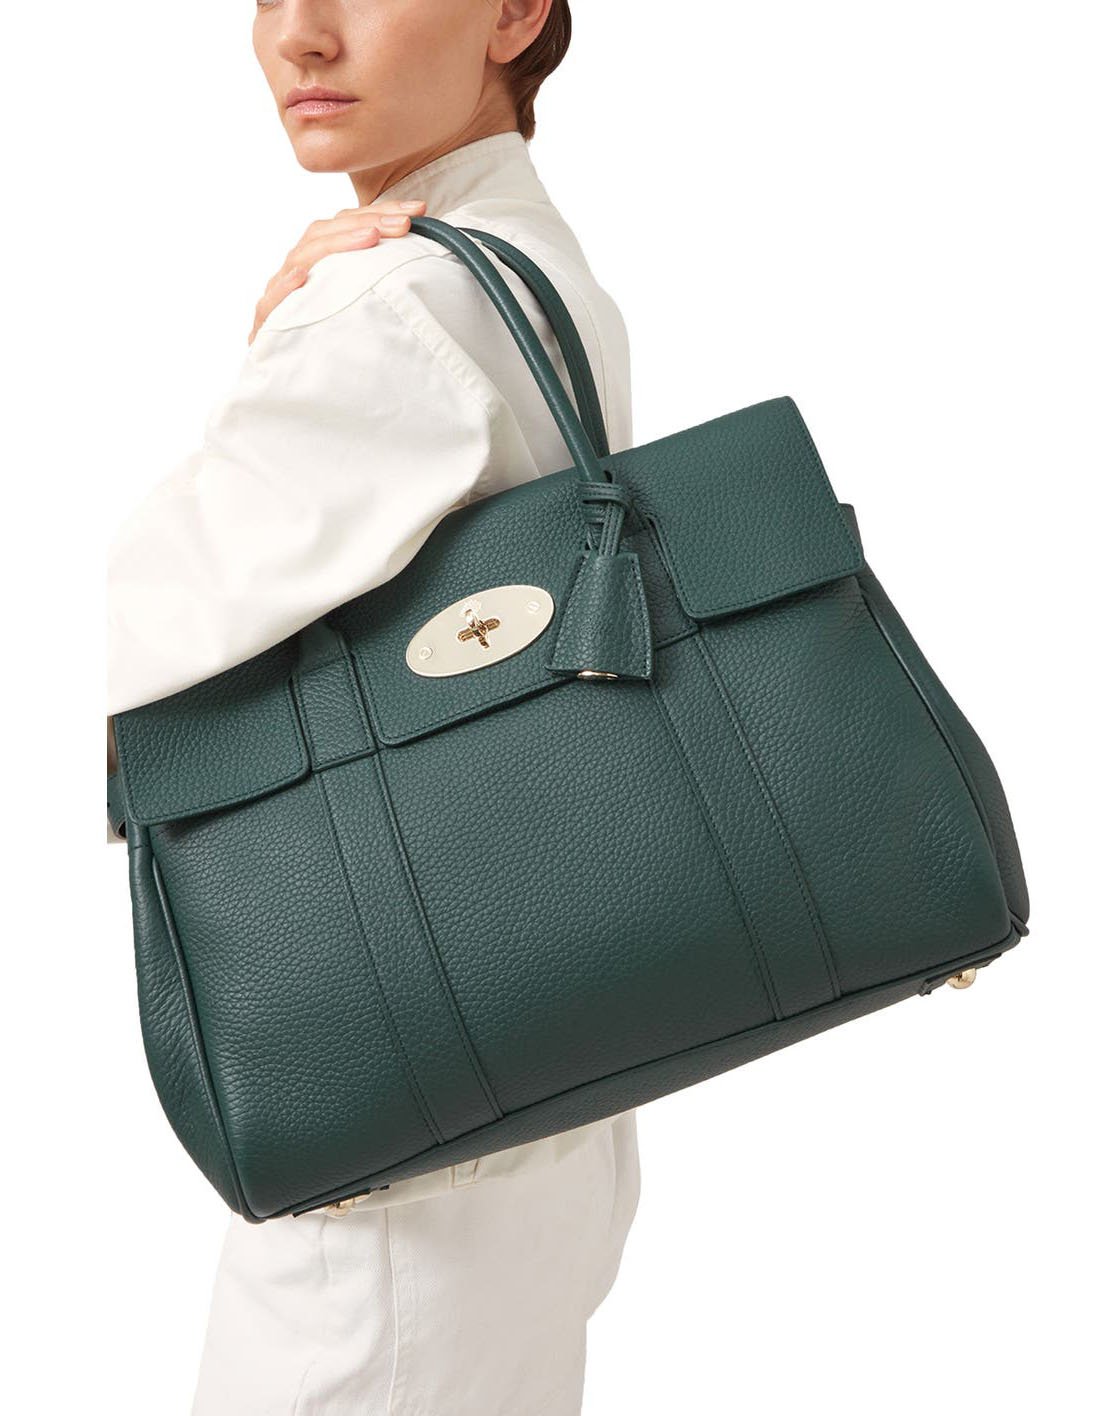 The Bayswater is a favorite among working women for its size and classic look